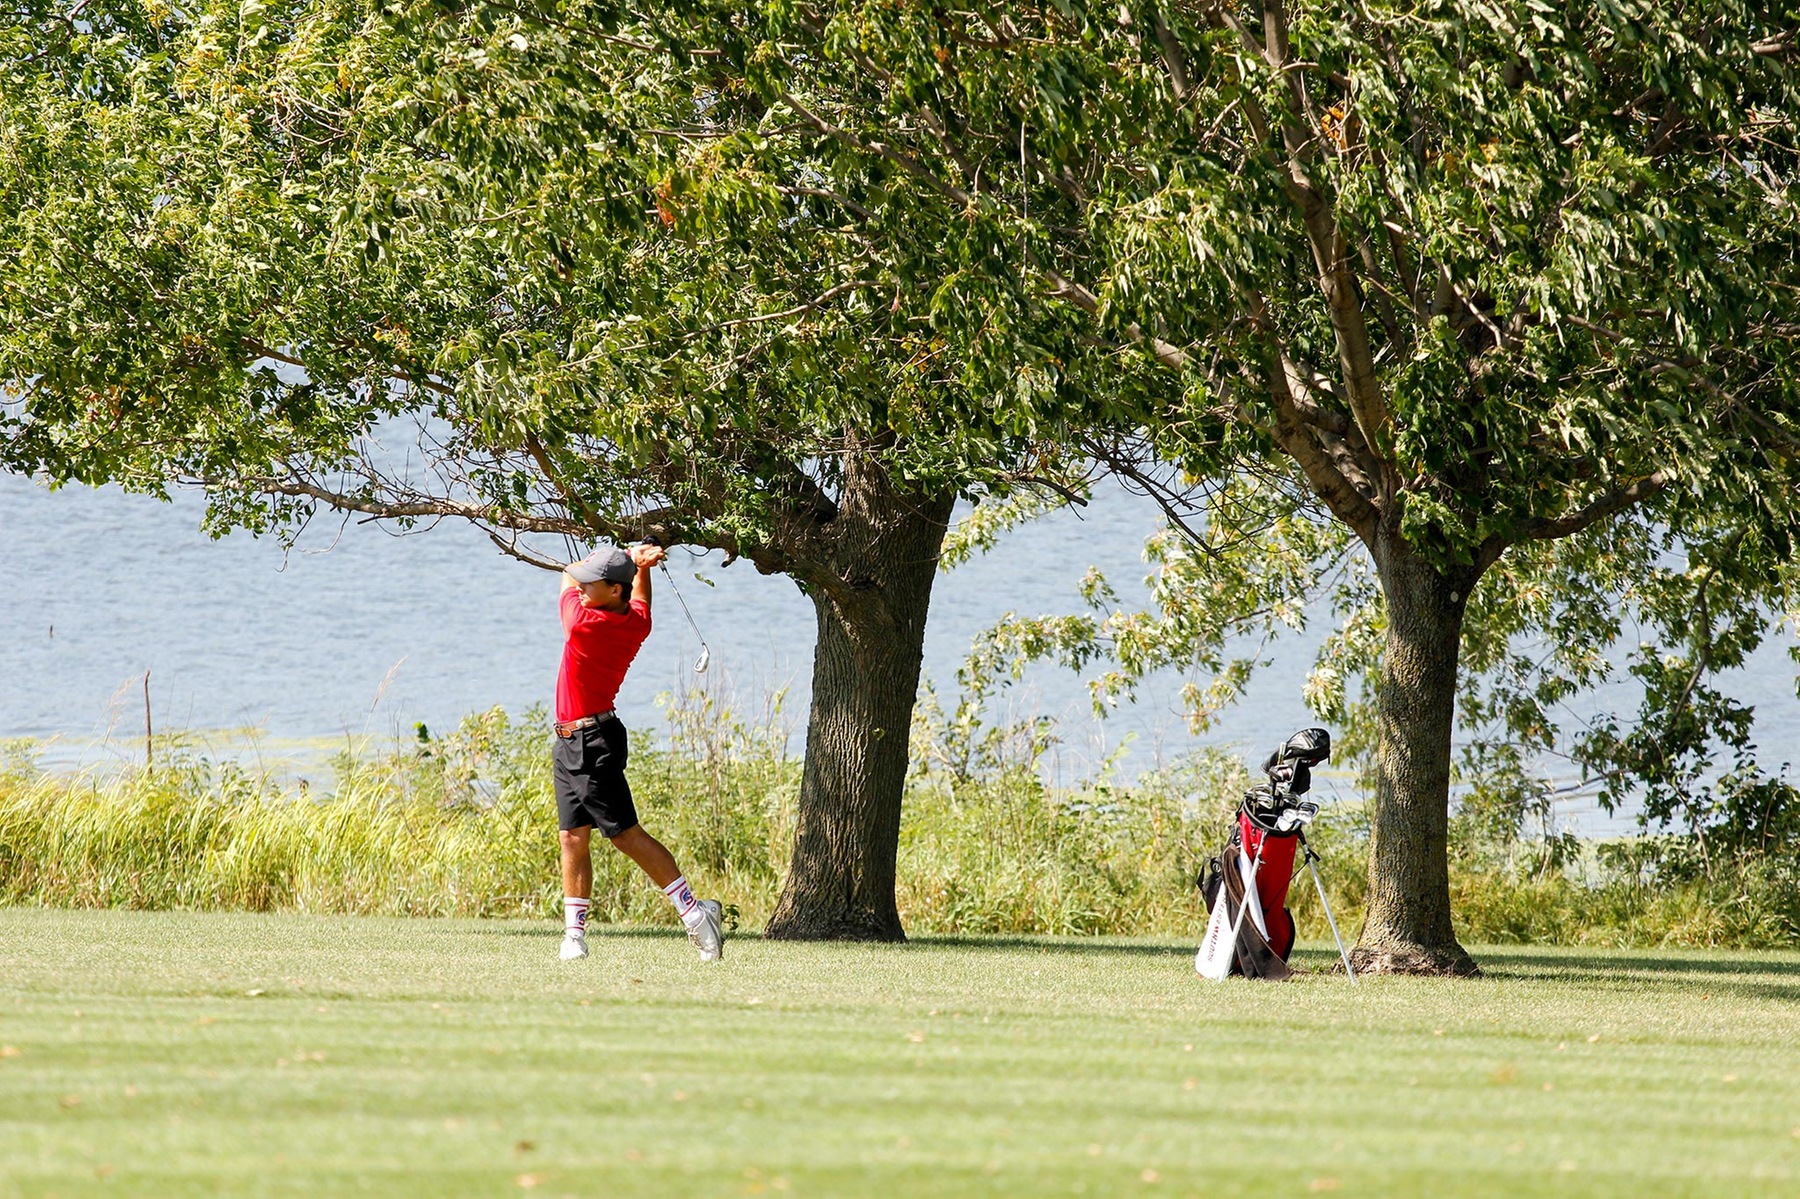 Reinhardt Saunderson hitting his second shot on hole eight at the Crestmoor Golf Club